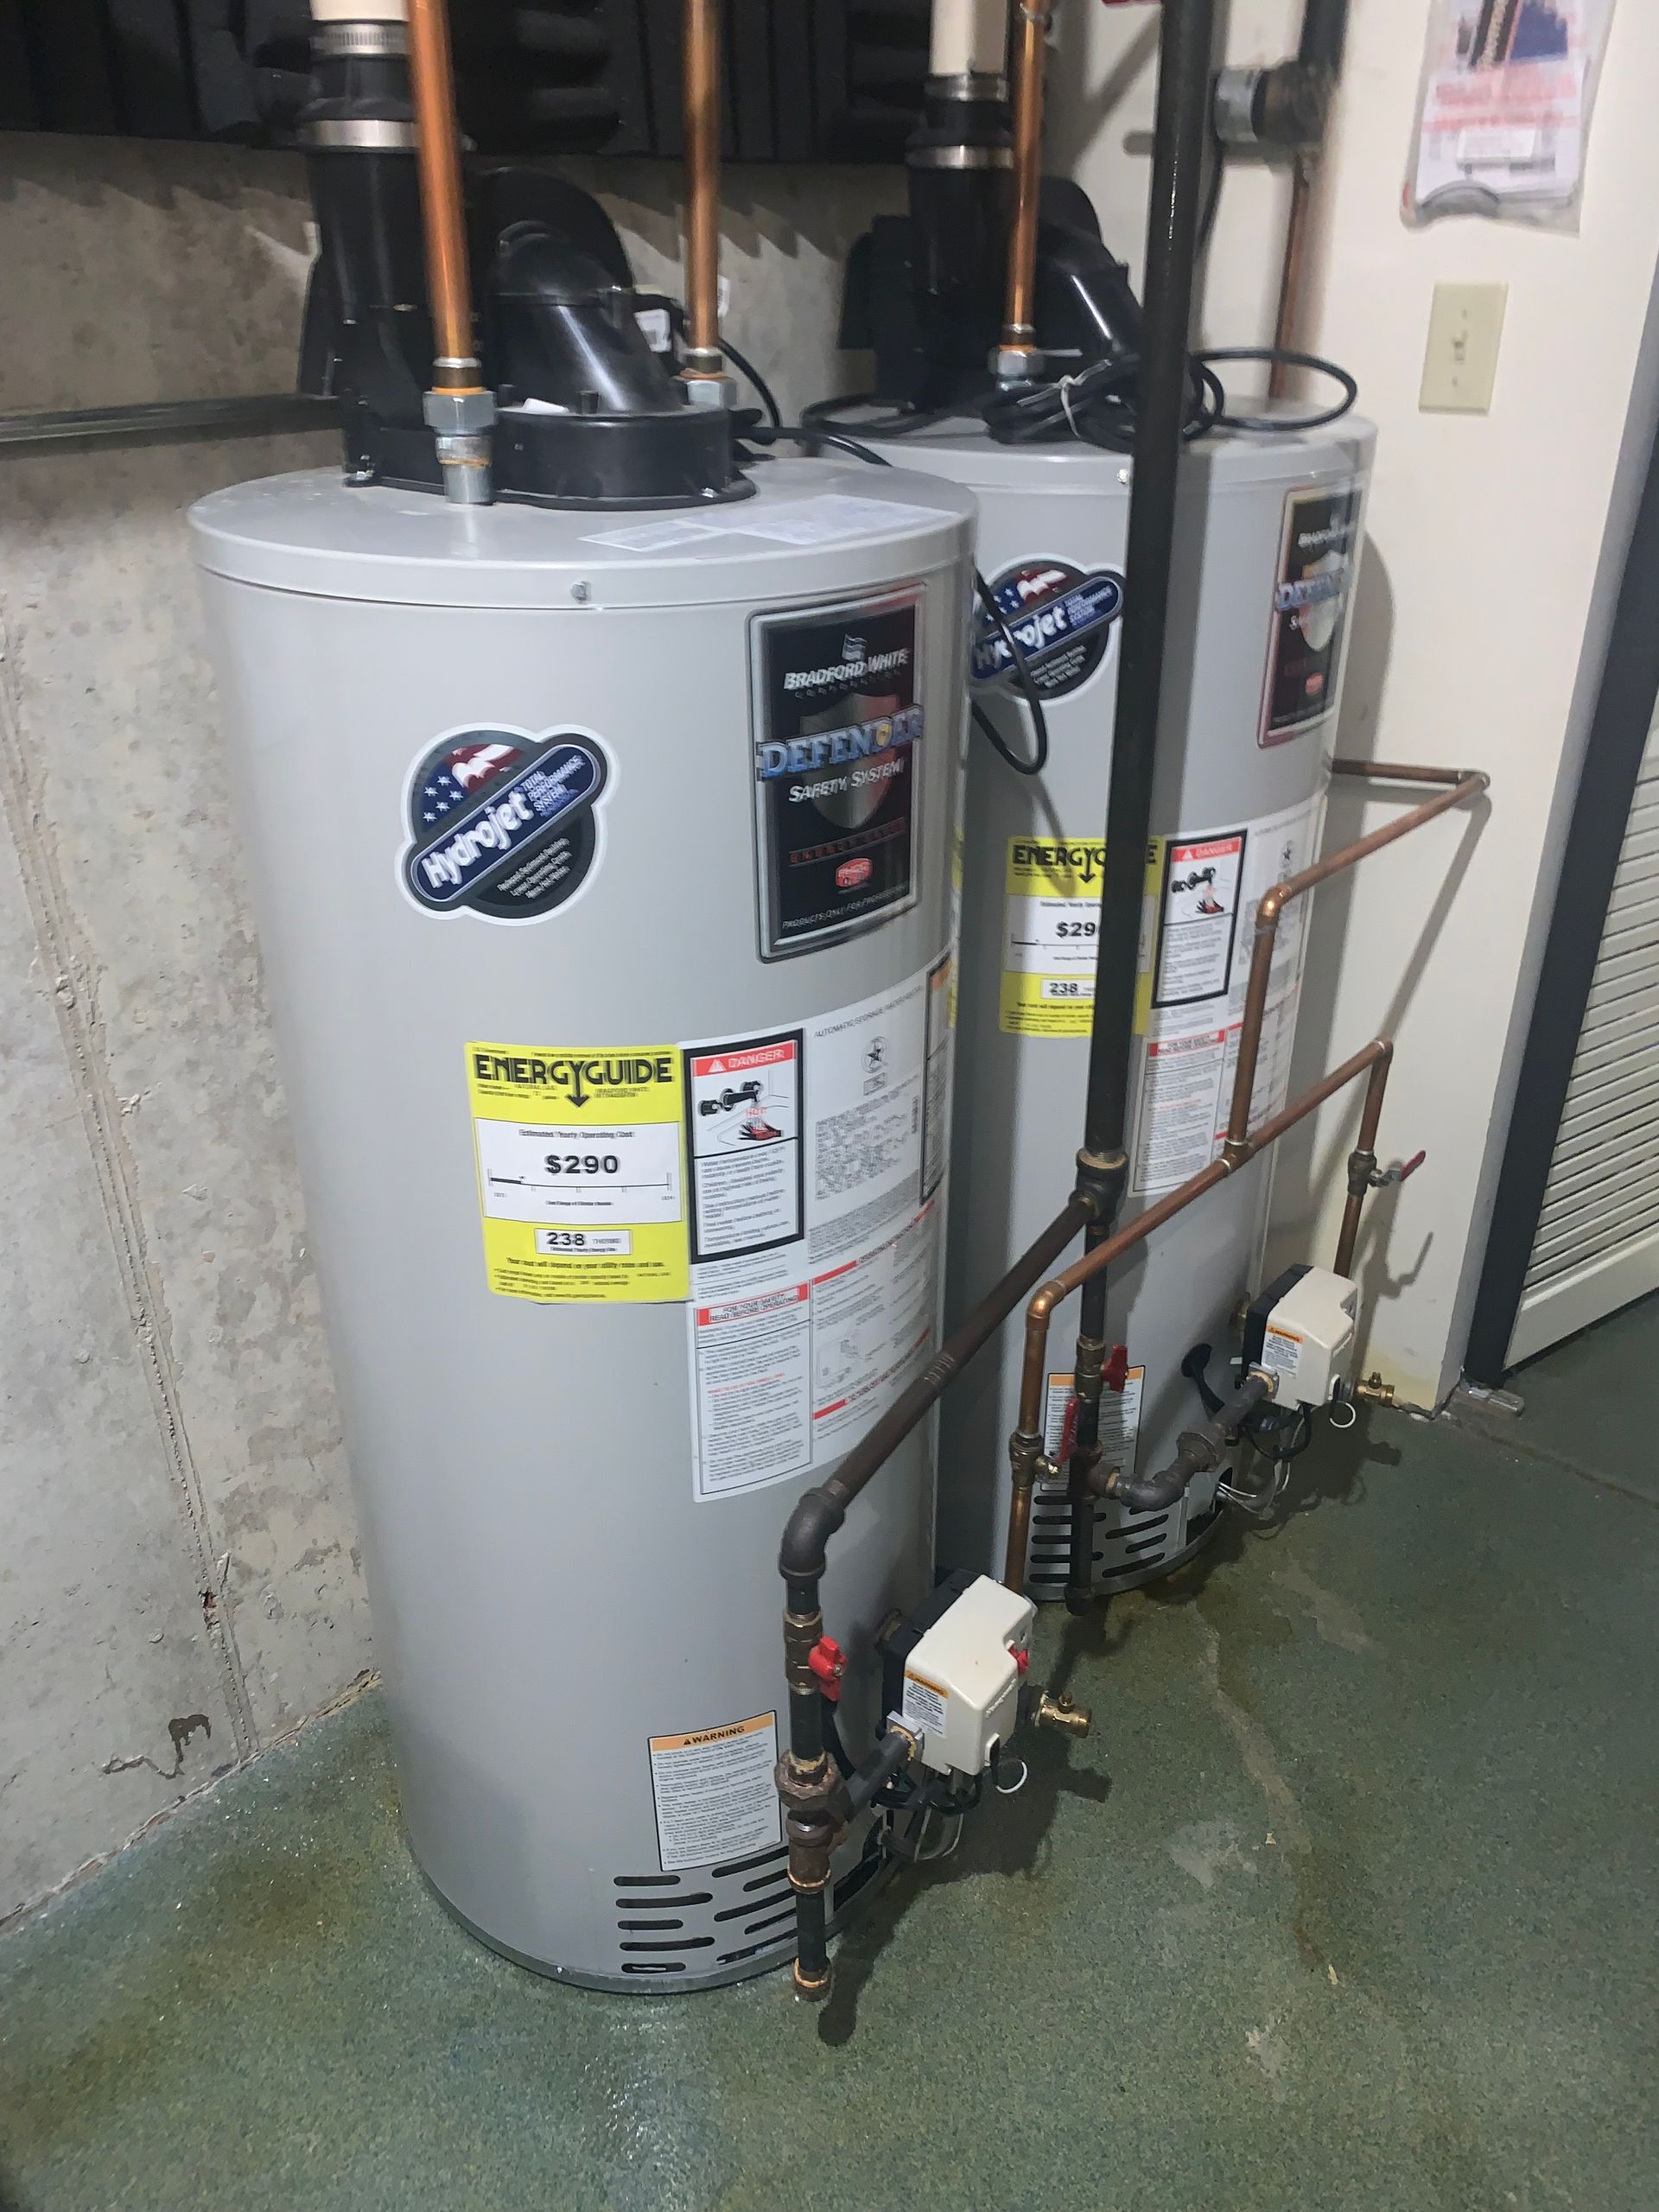 Mount Prospect Power Vent Water Heaters Installed Together in a Large Home